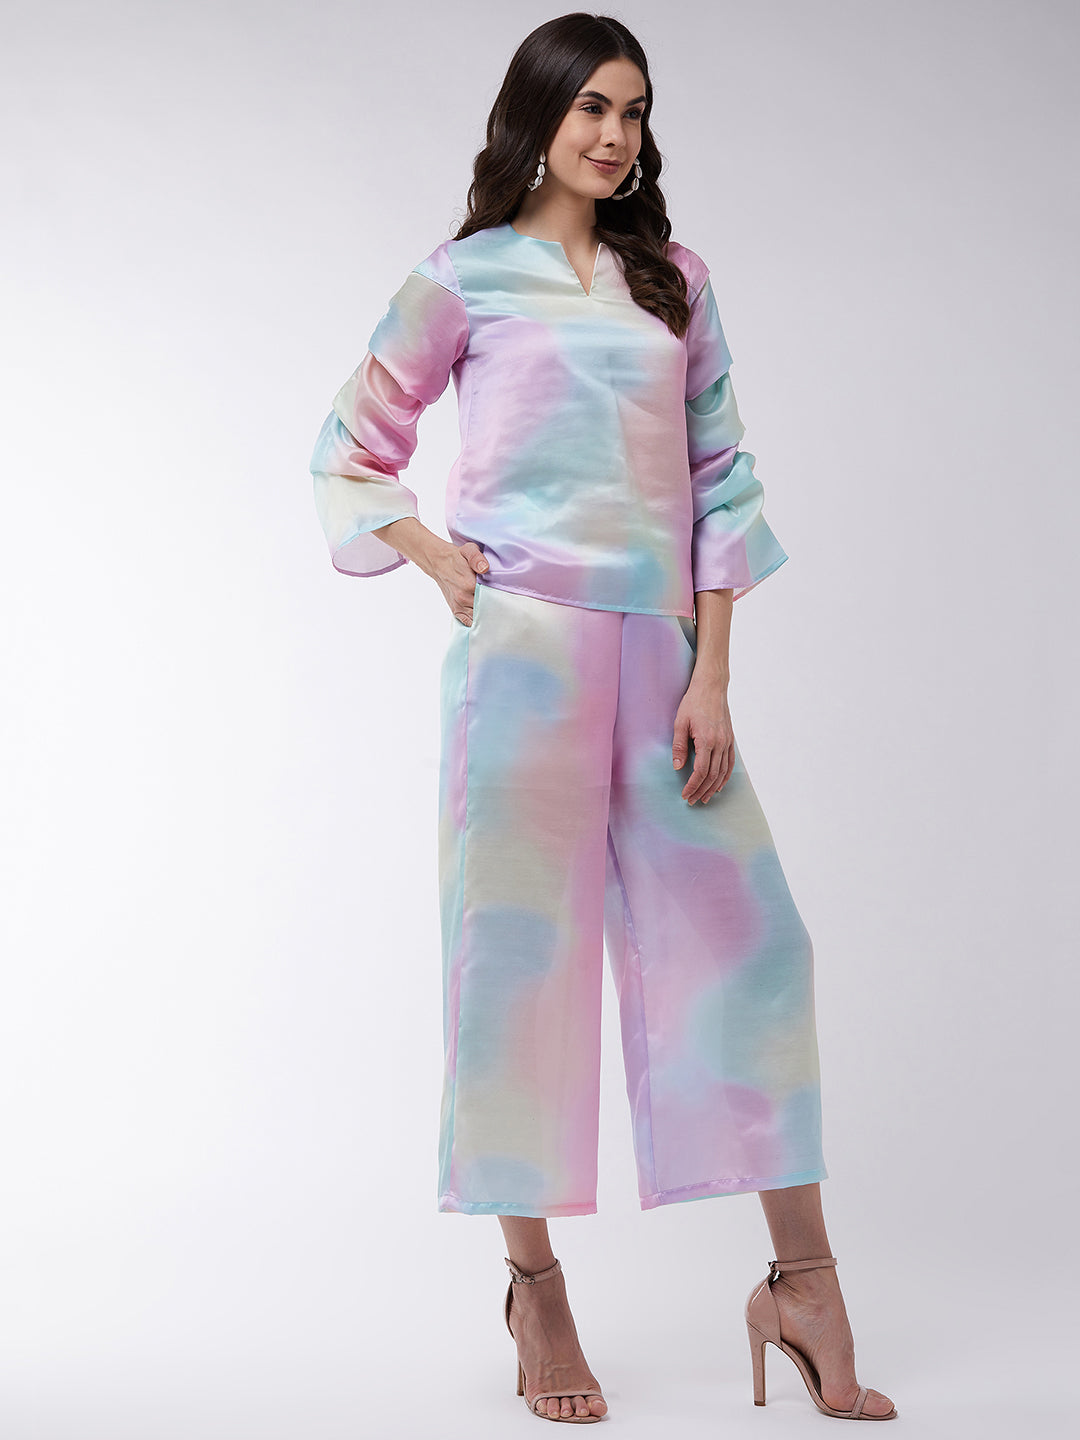 Candy Inspired Digital Printed Top With Pleated Sleeves And Matched Pants